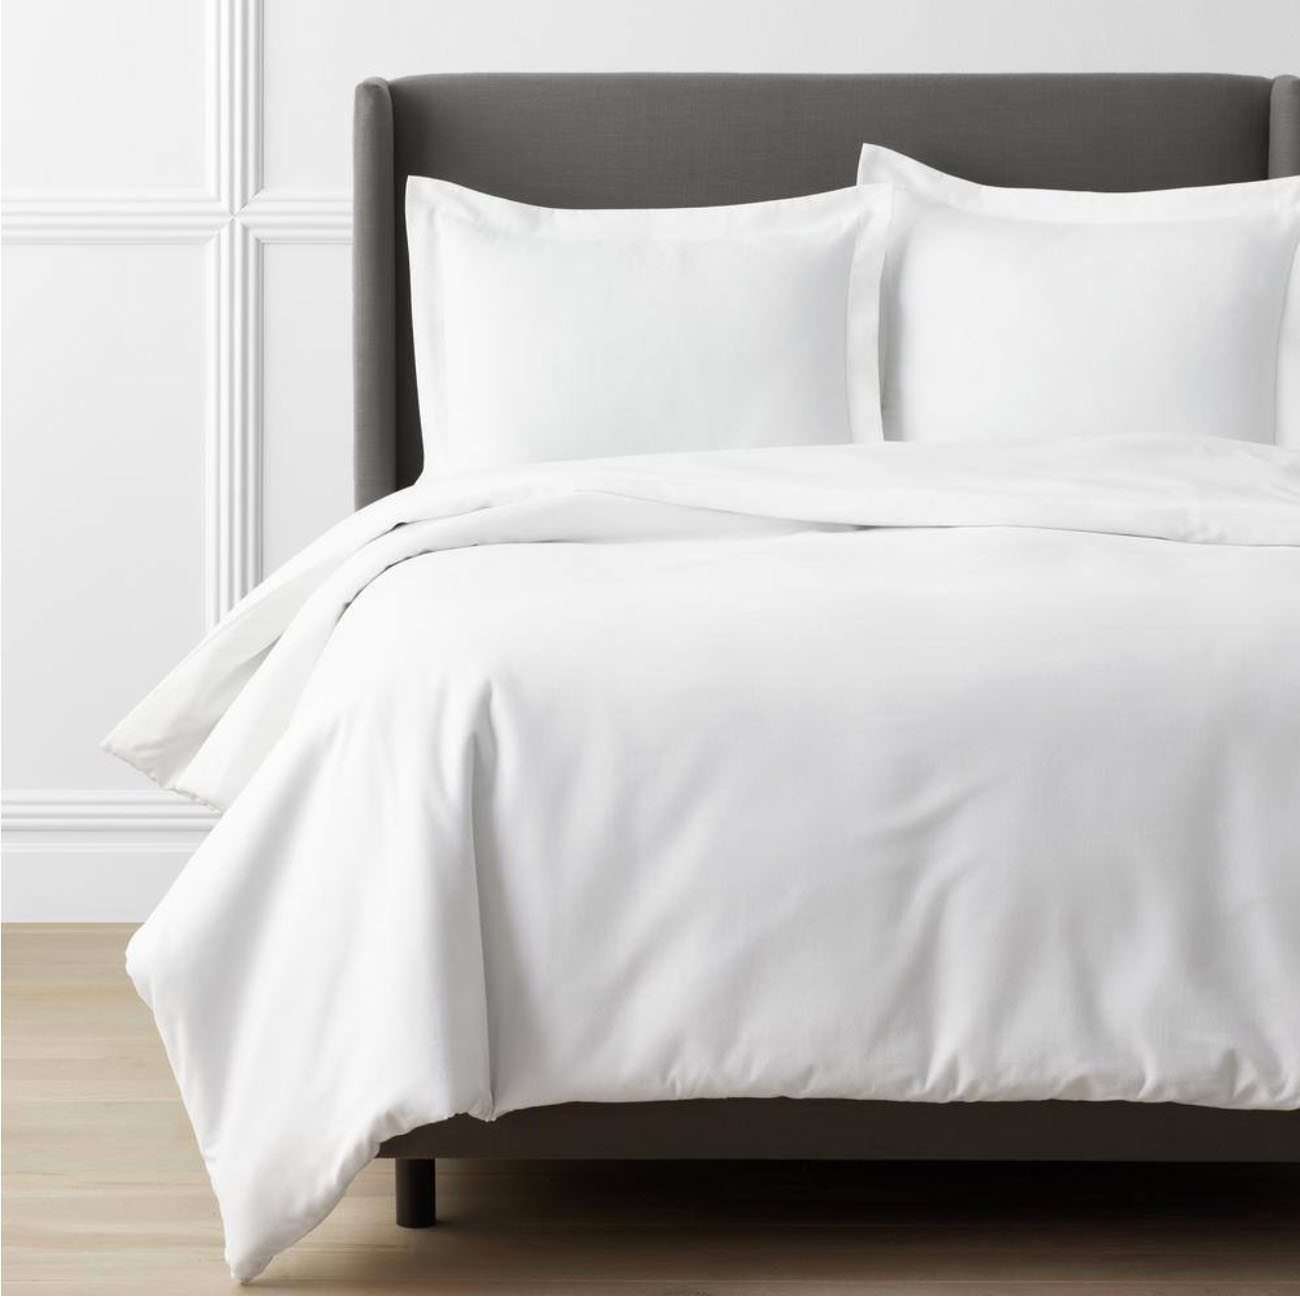 White flannel sheets in bedroom setting